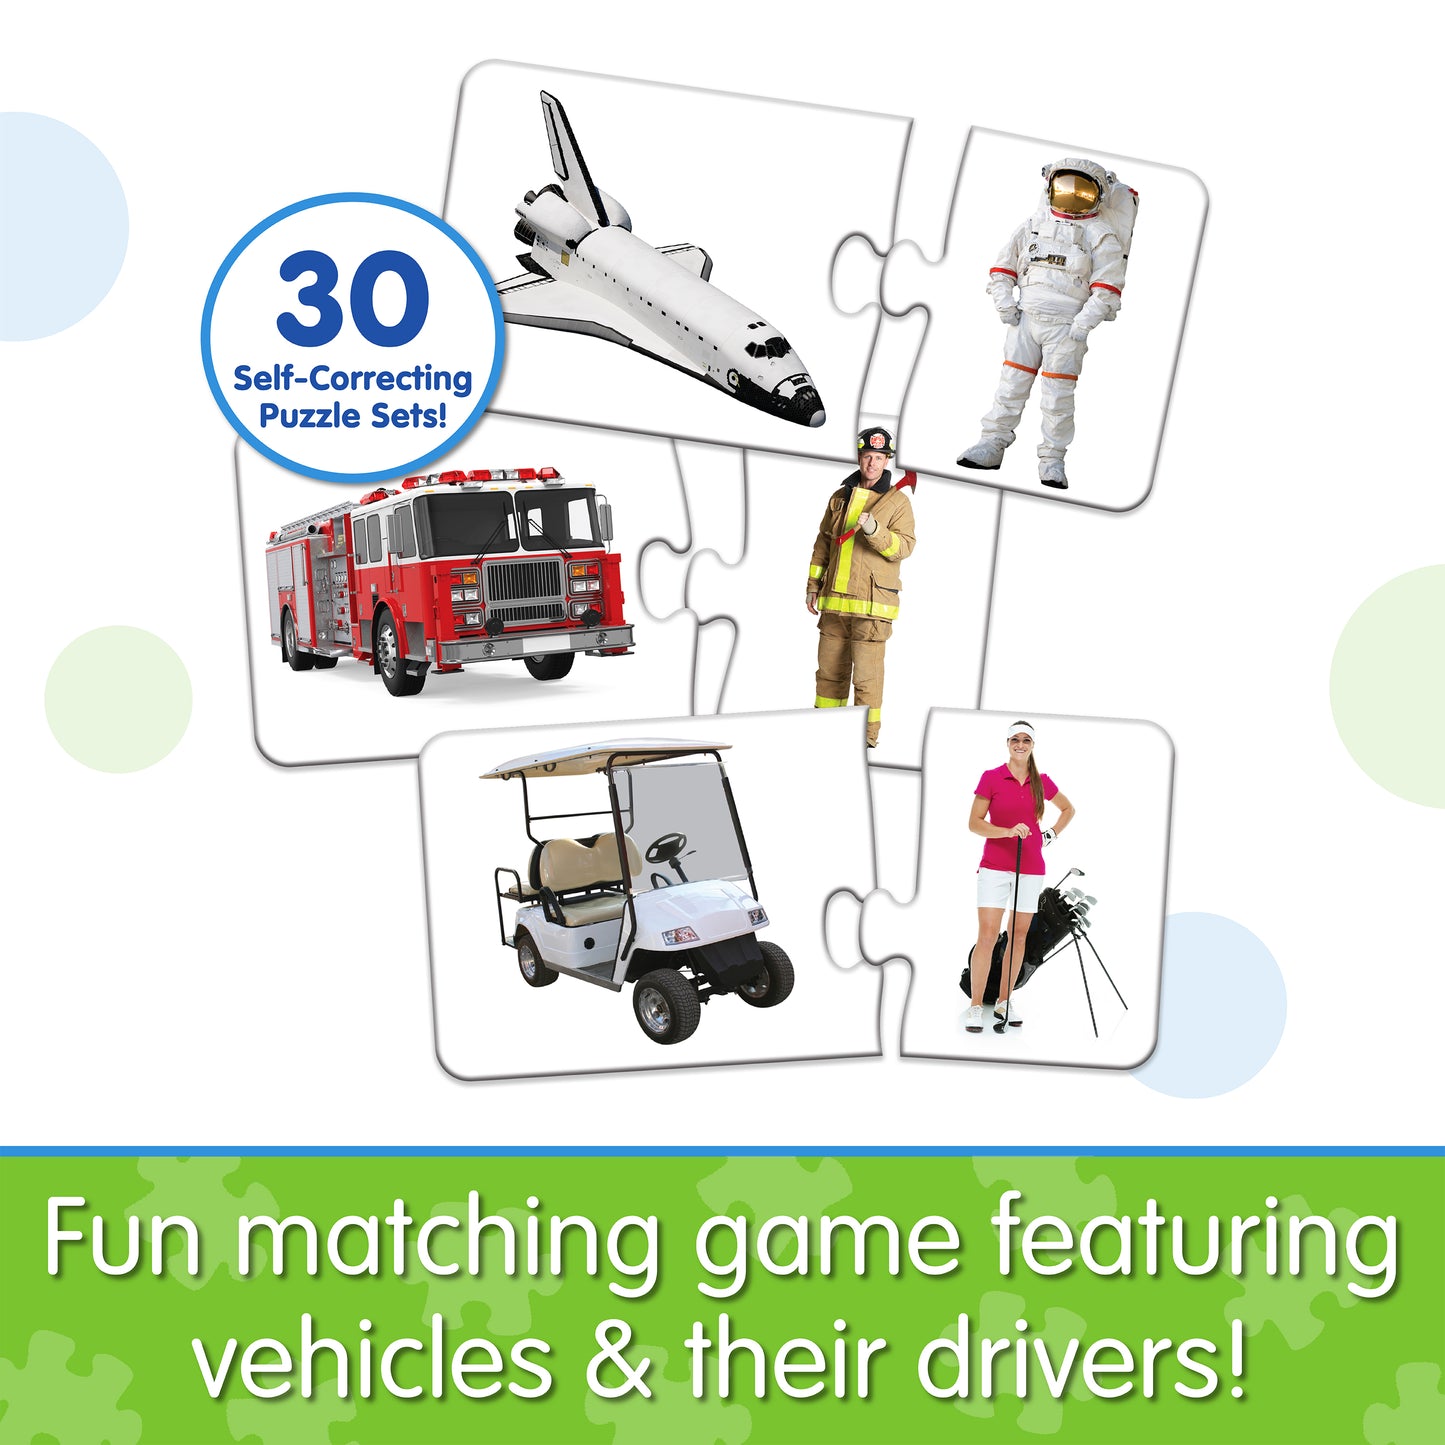 Infographic about Match It - Match My Ride that says, "Fun matching game featuring vehicles and their drivers!"